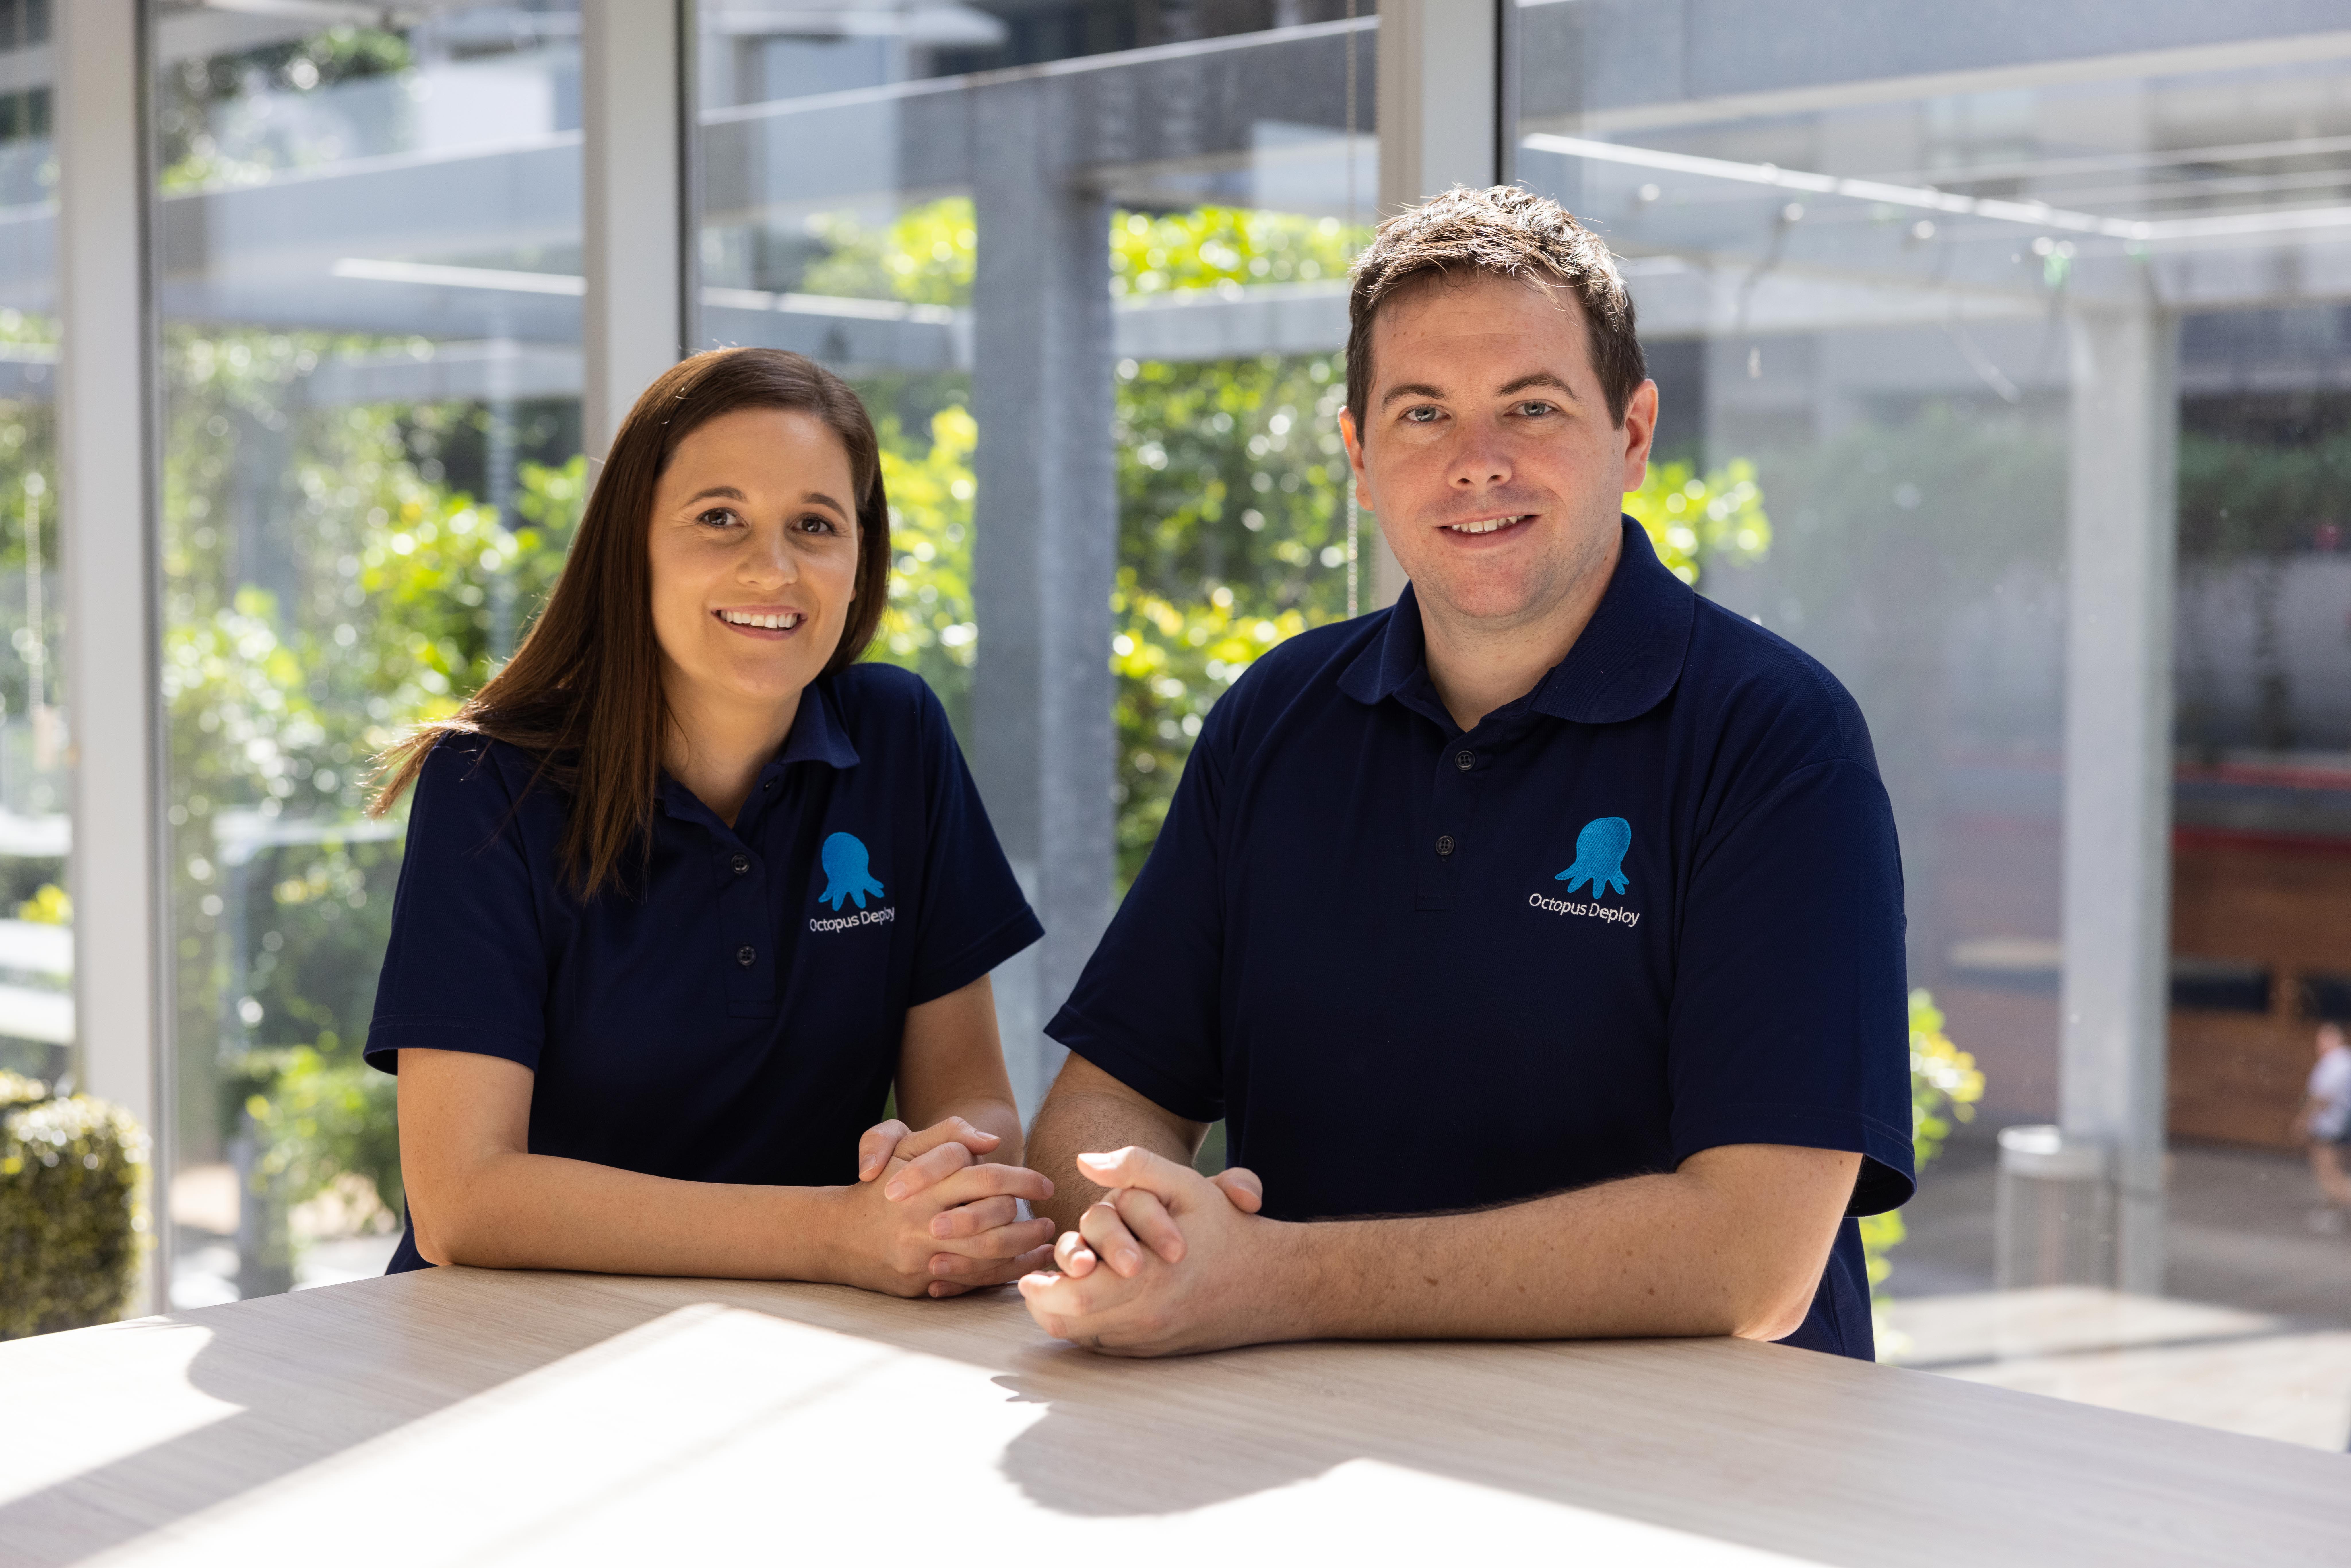 A photo of Octopus Deploy's chief financial officer Sonia Stovell and chief executive officer Paul Stovell